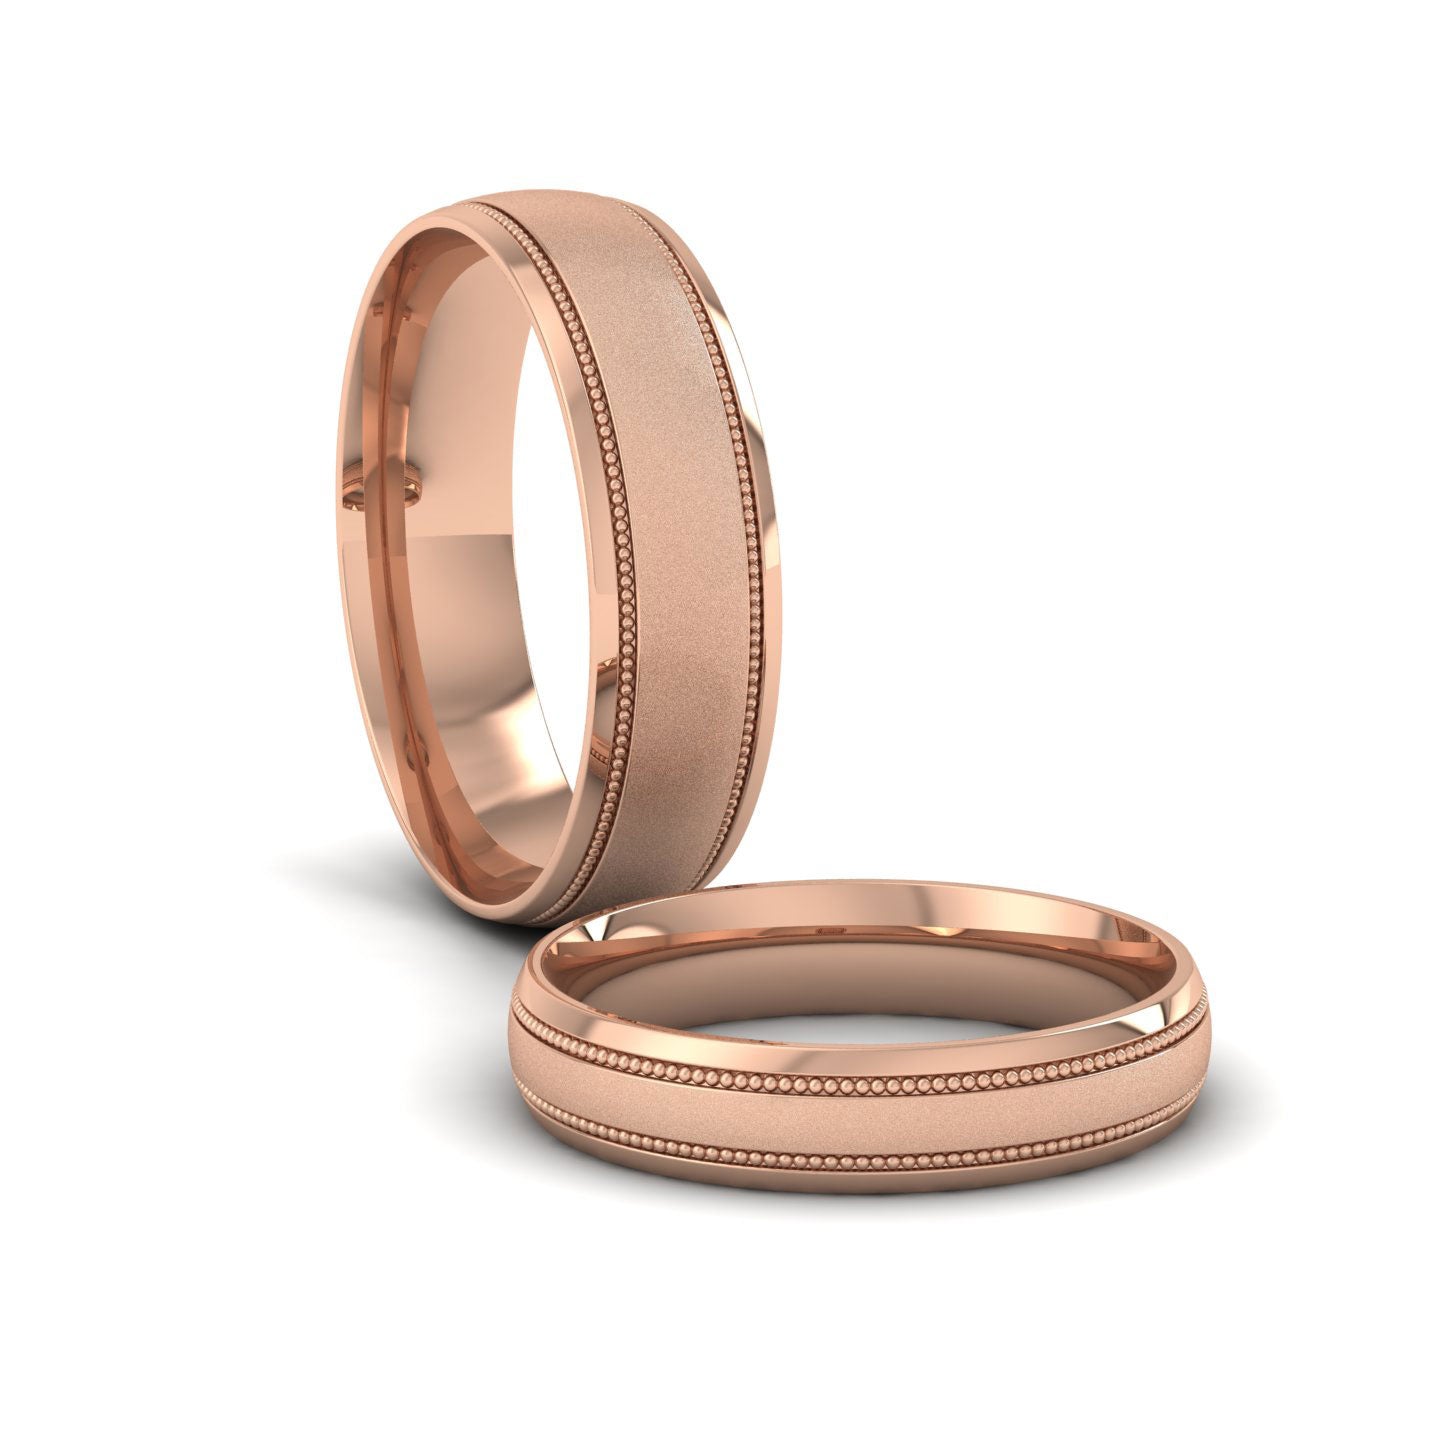 Millgrain And Contrasting Matt And Shiny Finish 18ct Rose Gold 6mm Wedding Ring